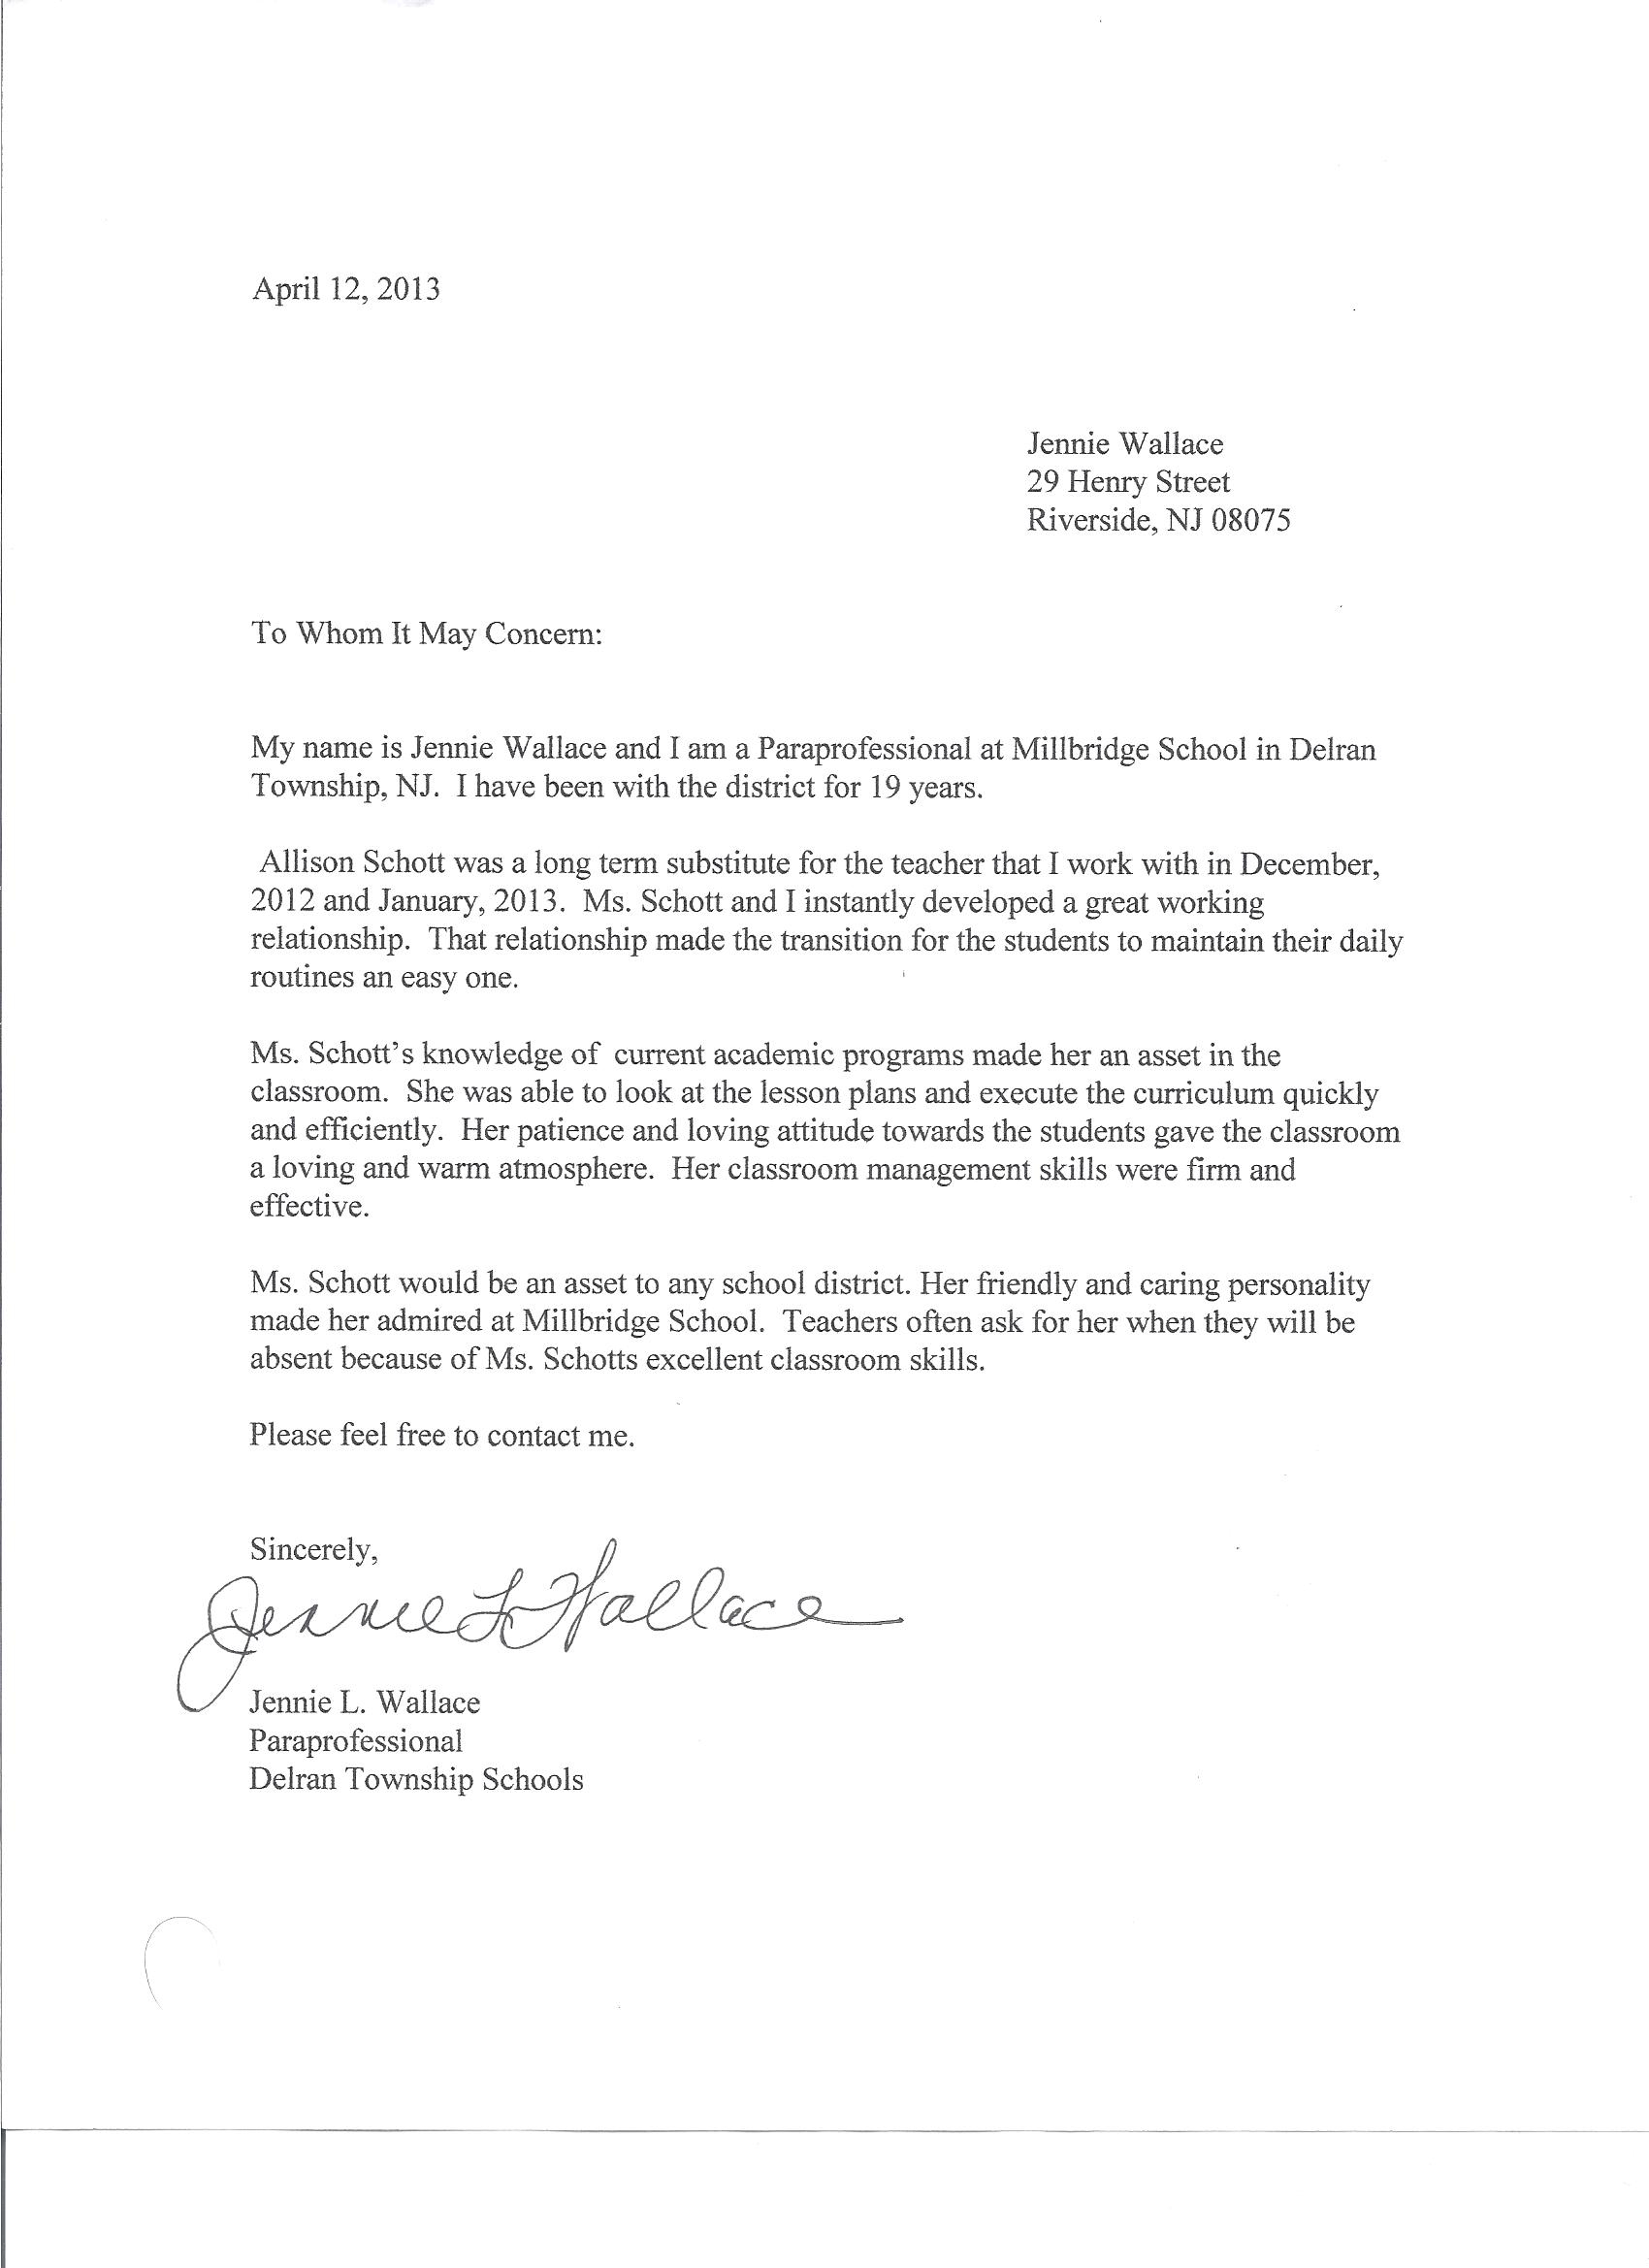 Sample Letter Of Recommendation For Paraprofessional Classles Democracy Hot Sex Picture 5732